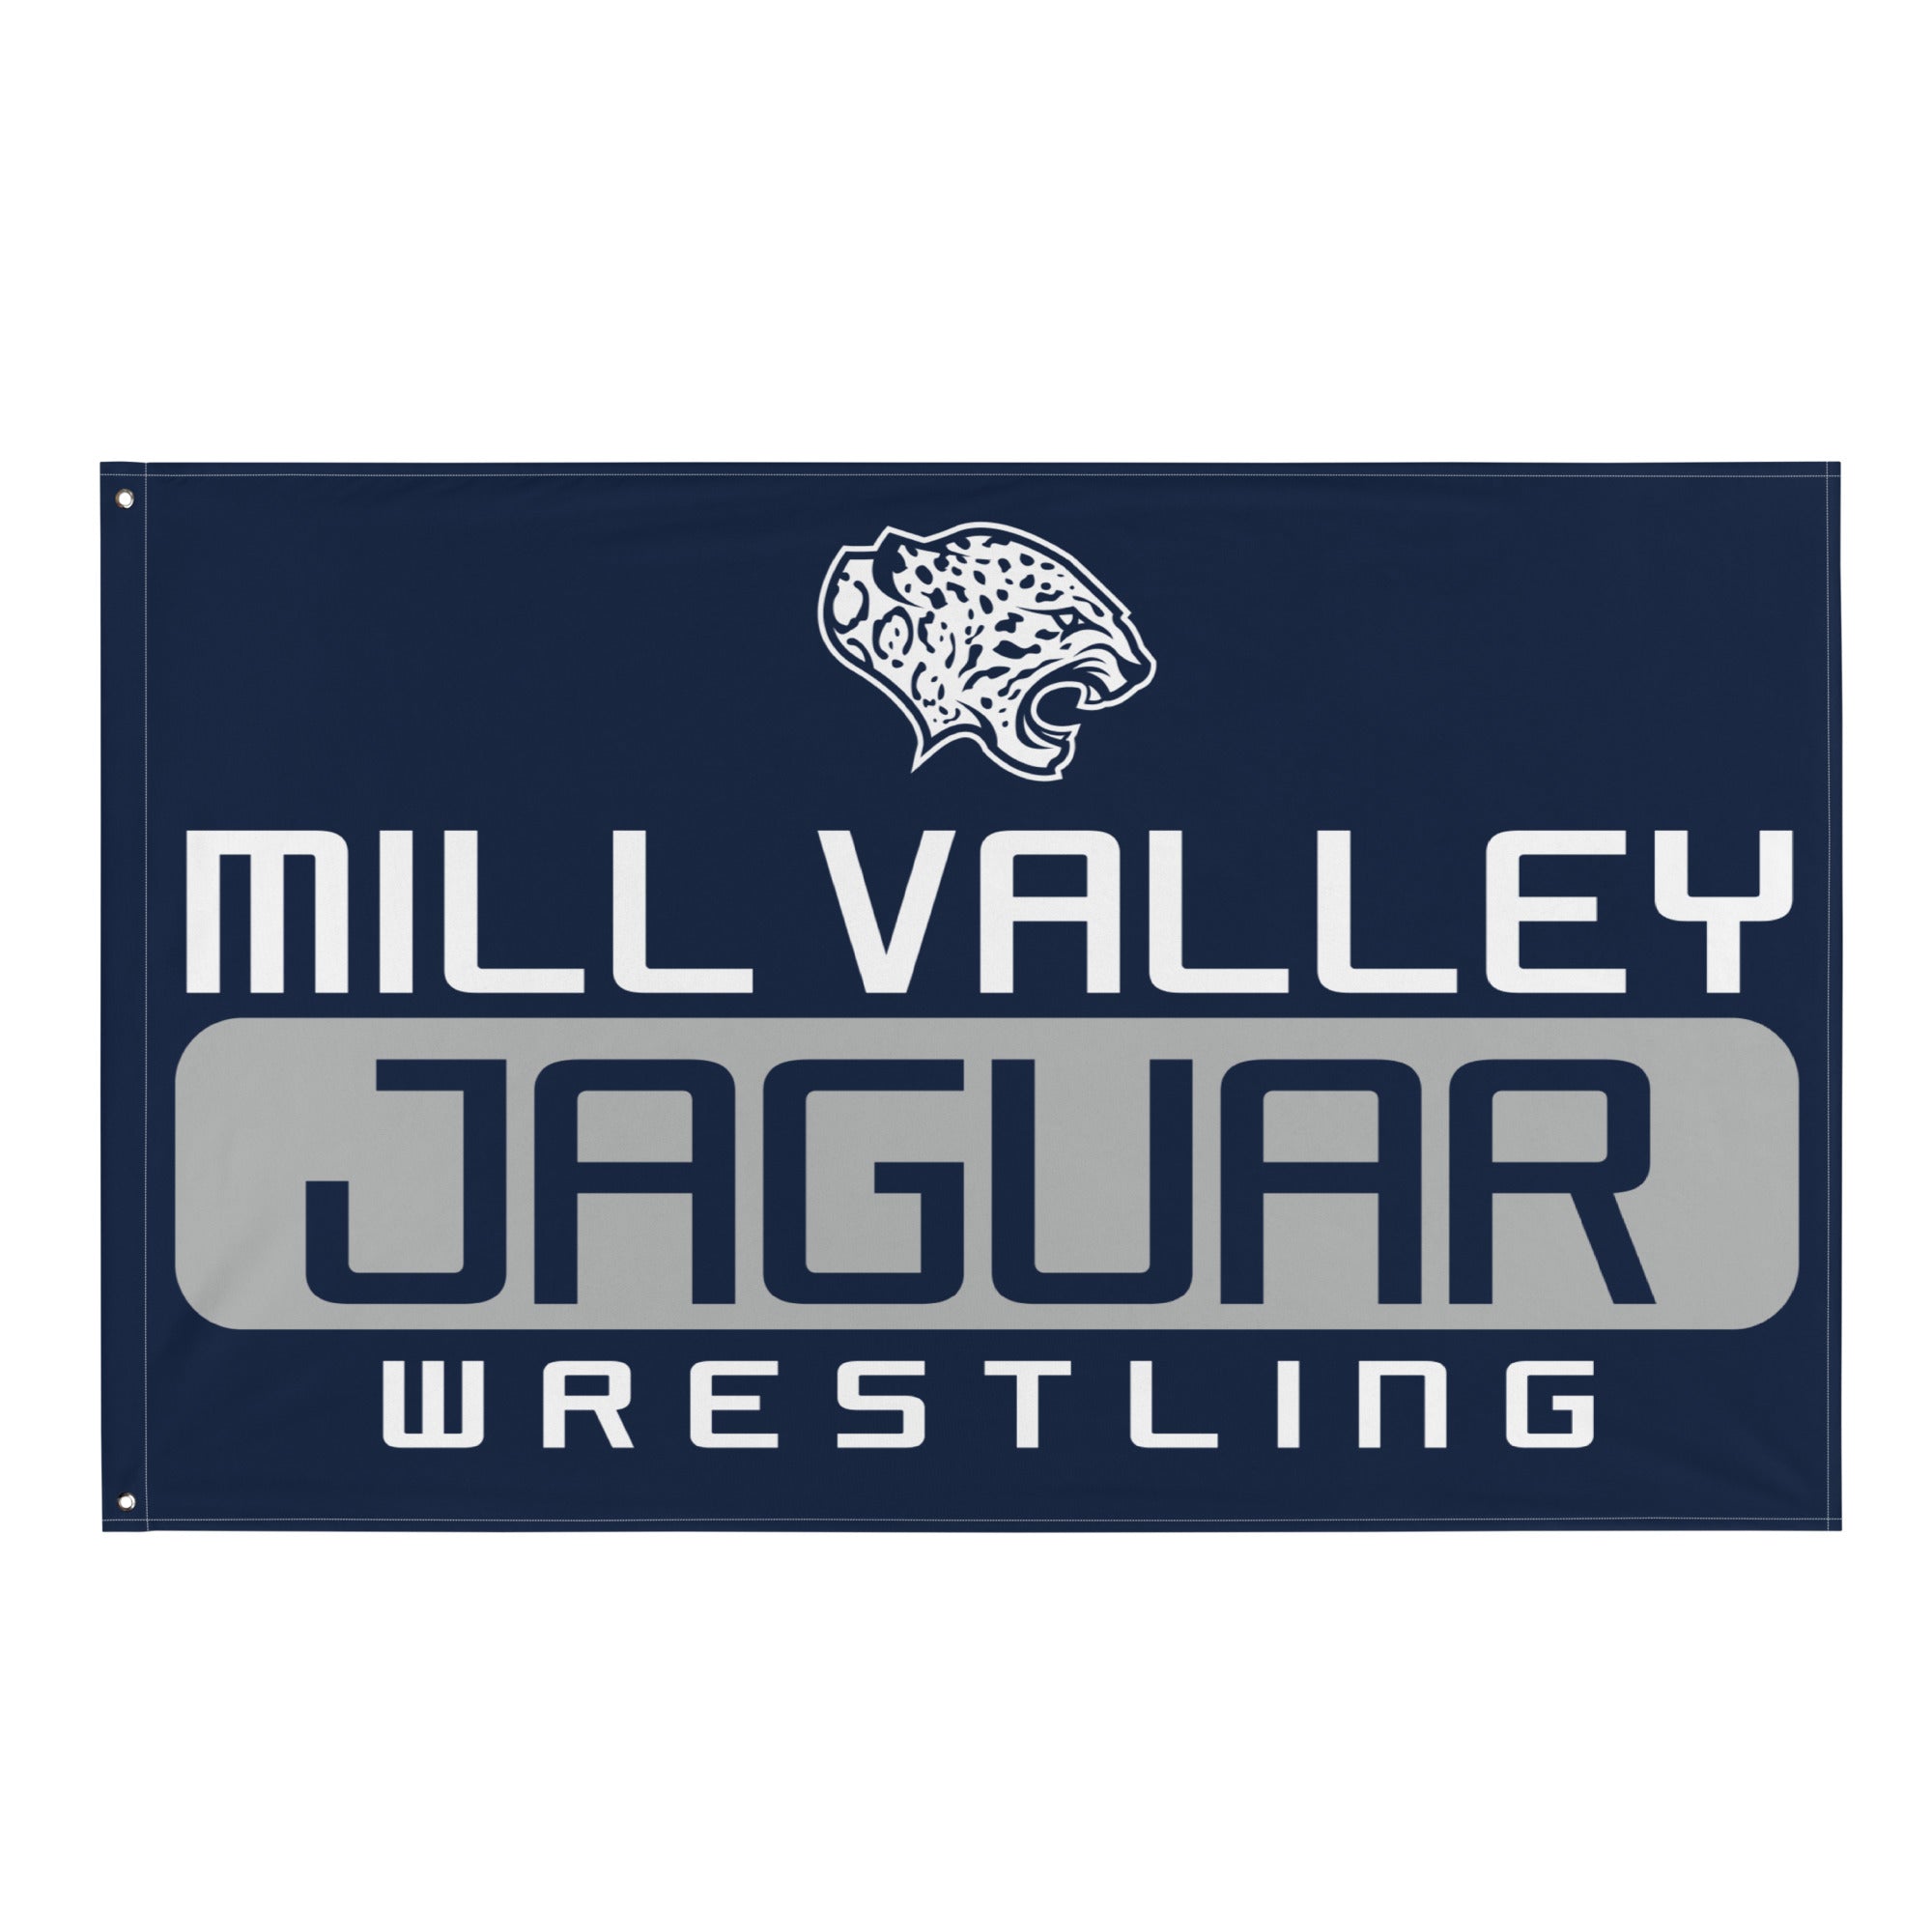 Mill Valley Wrestling Club All-Over Print Flag